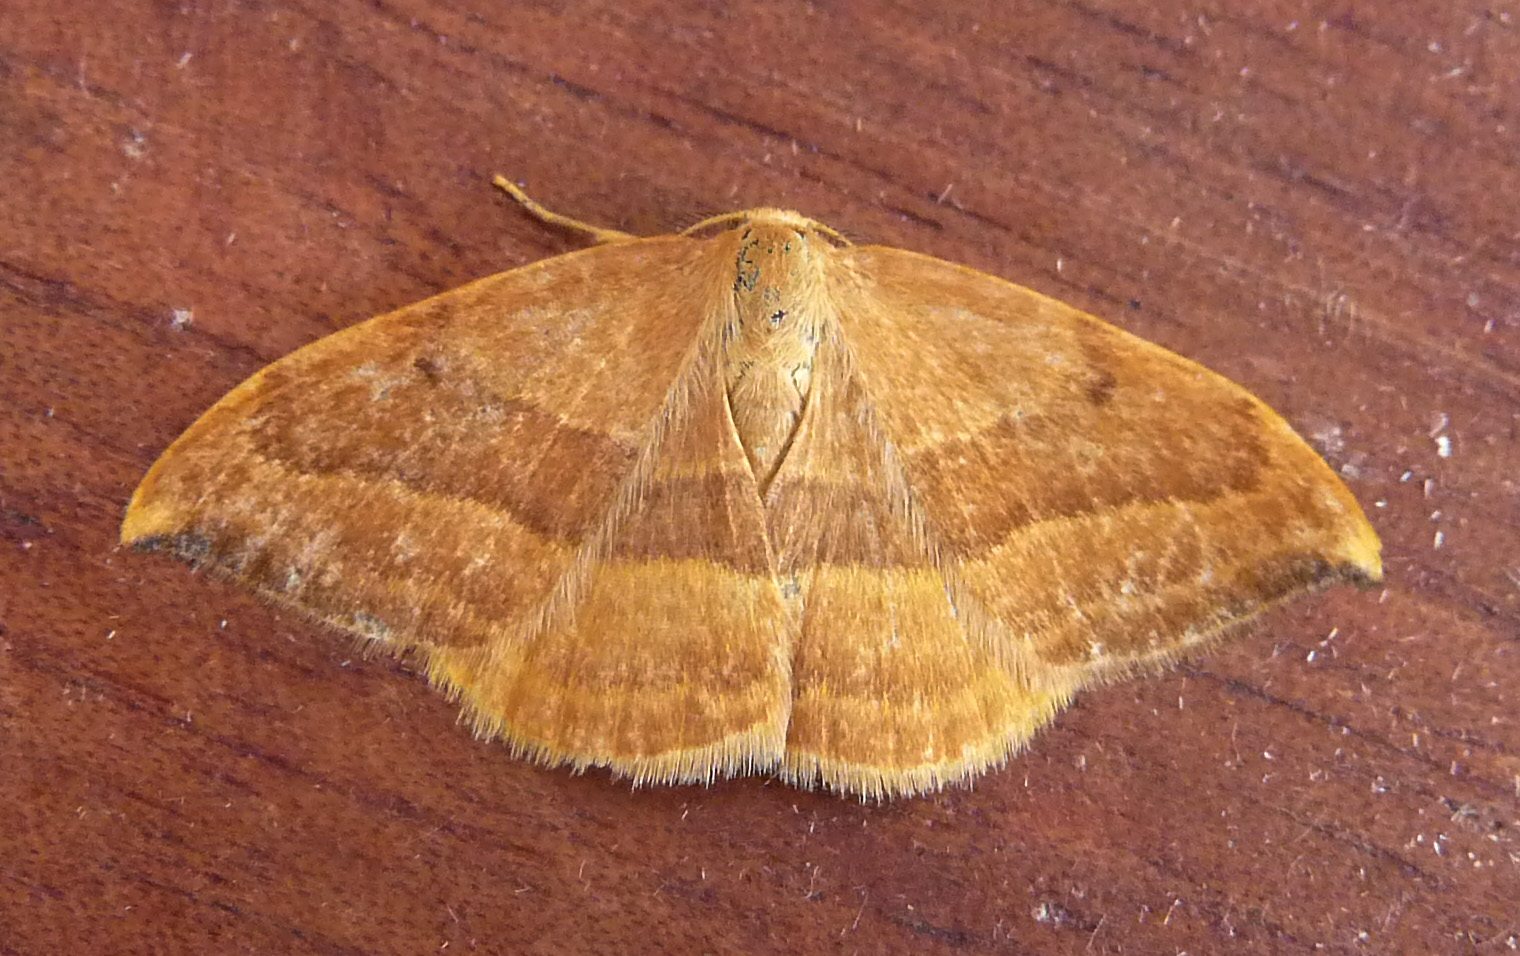 the brown moth is sitting on a wooden table